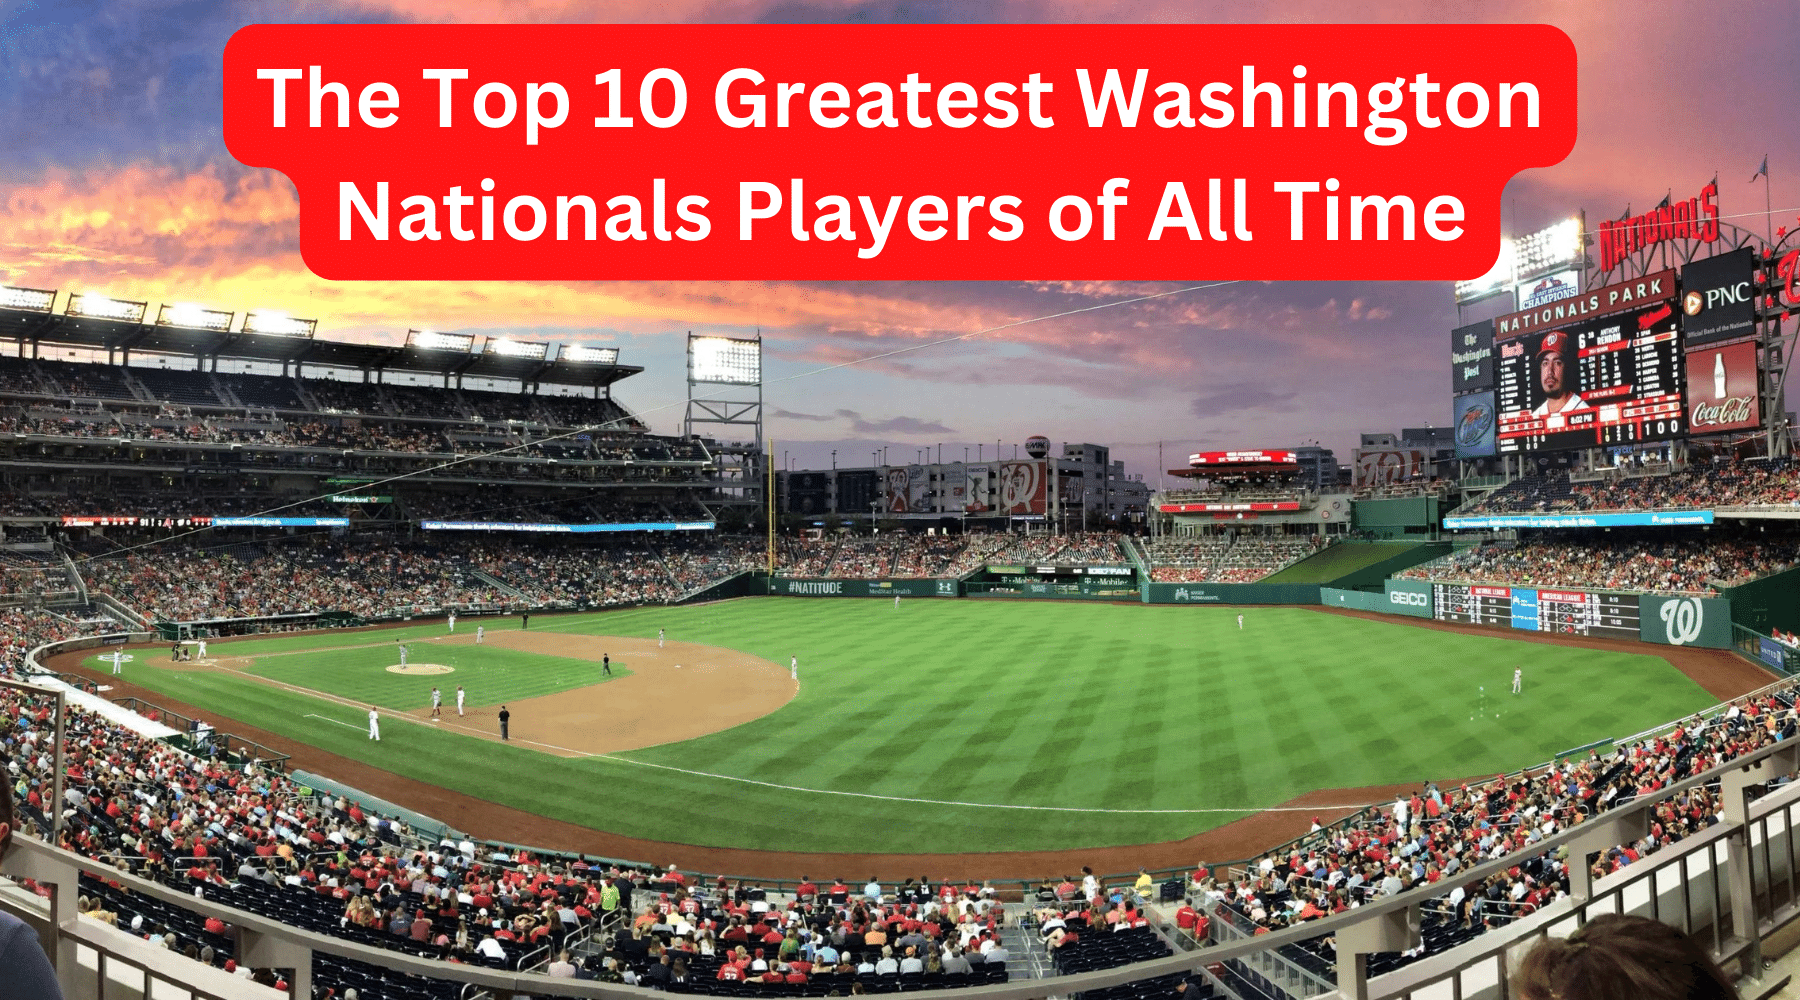 The Top 10 Greatest Washington Nationals Players of All Time